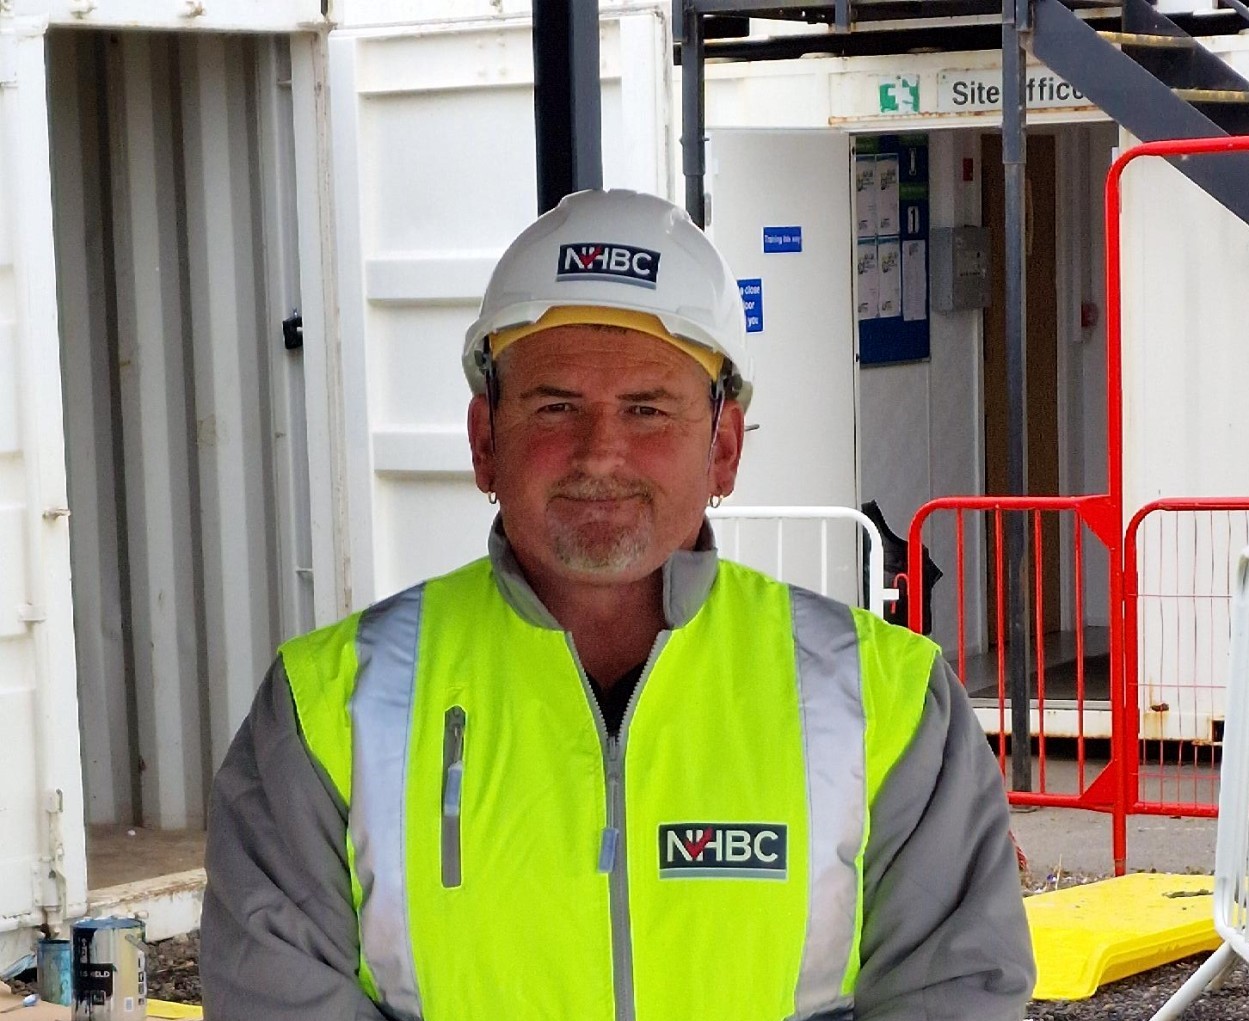 a photo of a man called phill wearing site safety clothing and smiling at the camera